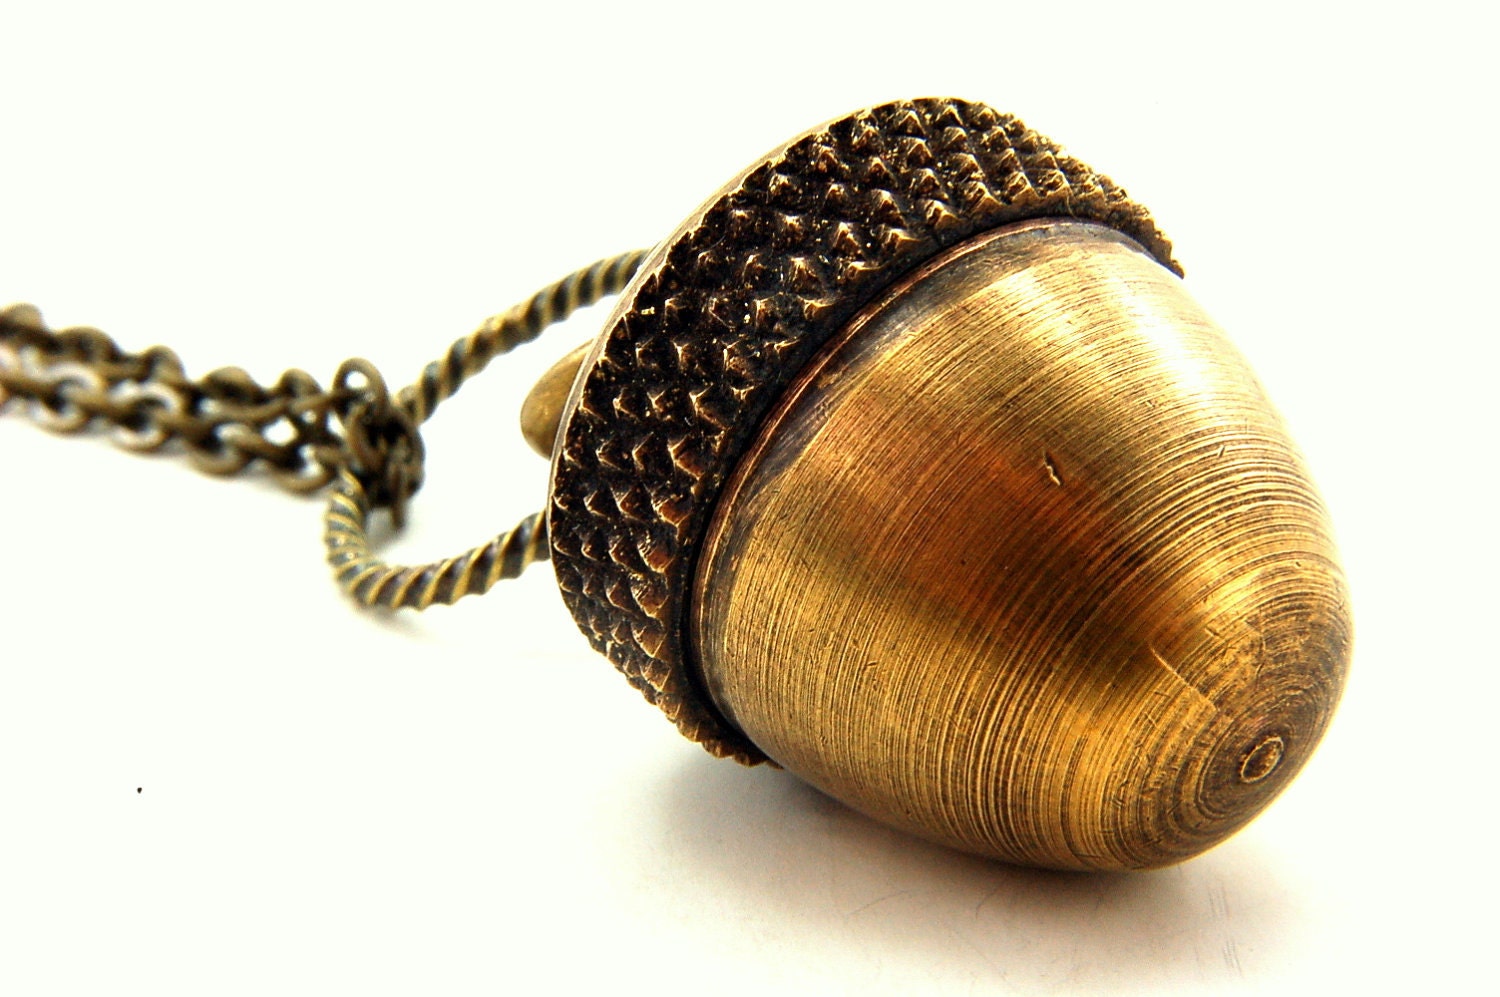 Acorn Necklace - An Acorn with a Secret  Fall Fashion - Capsule Container  Pendant Necklace - by Gwen DELICIOUS Jewelry Design - GwenDelicious